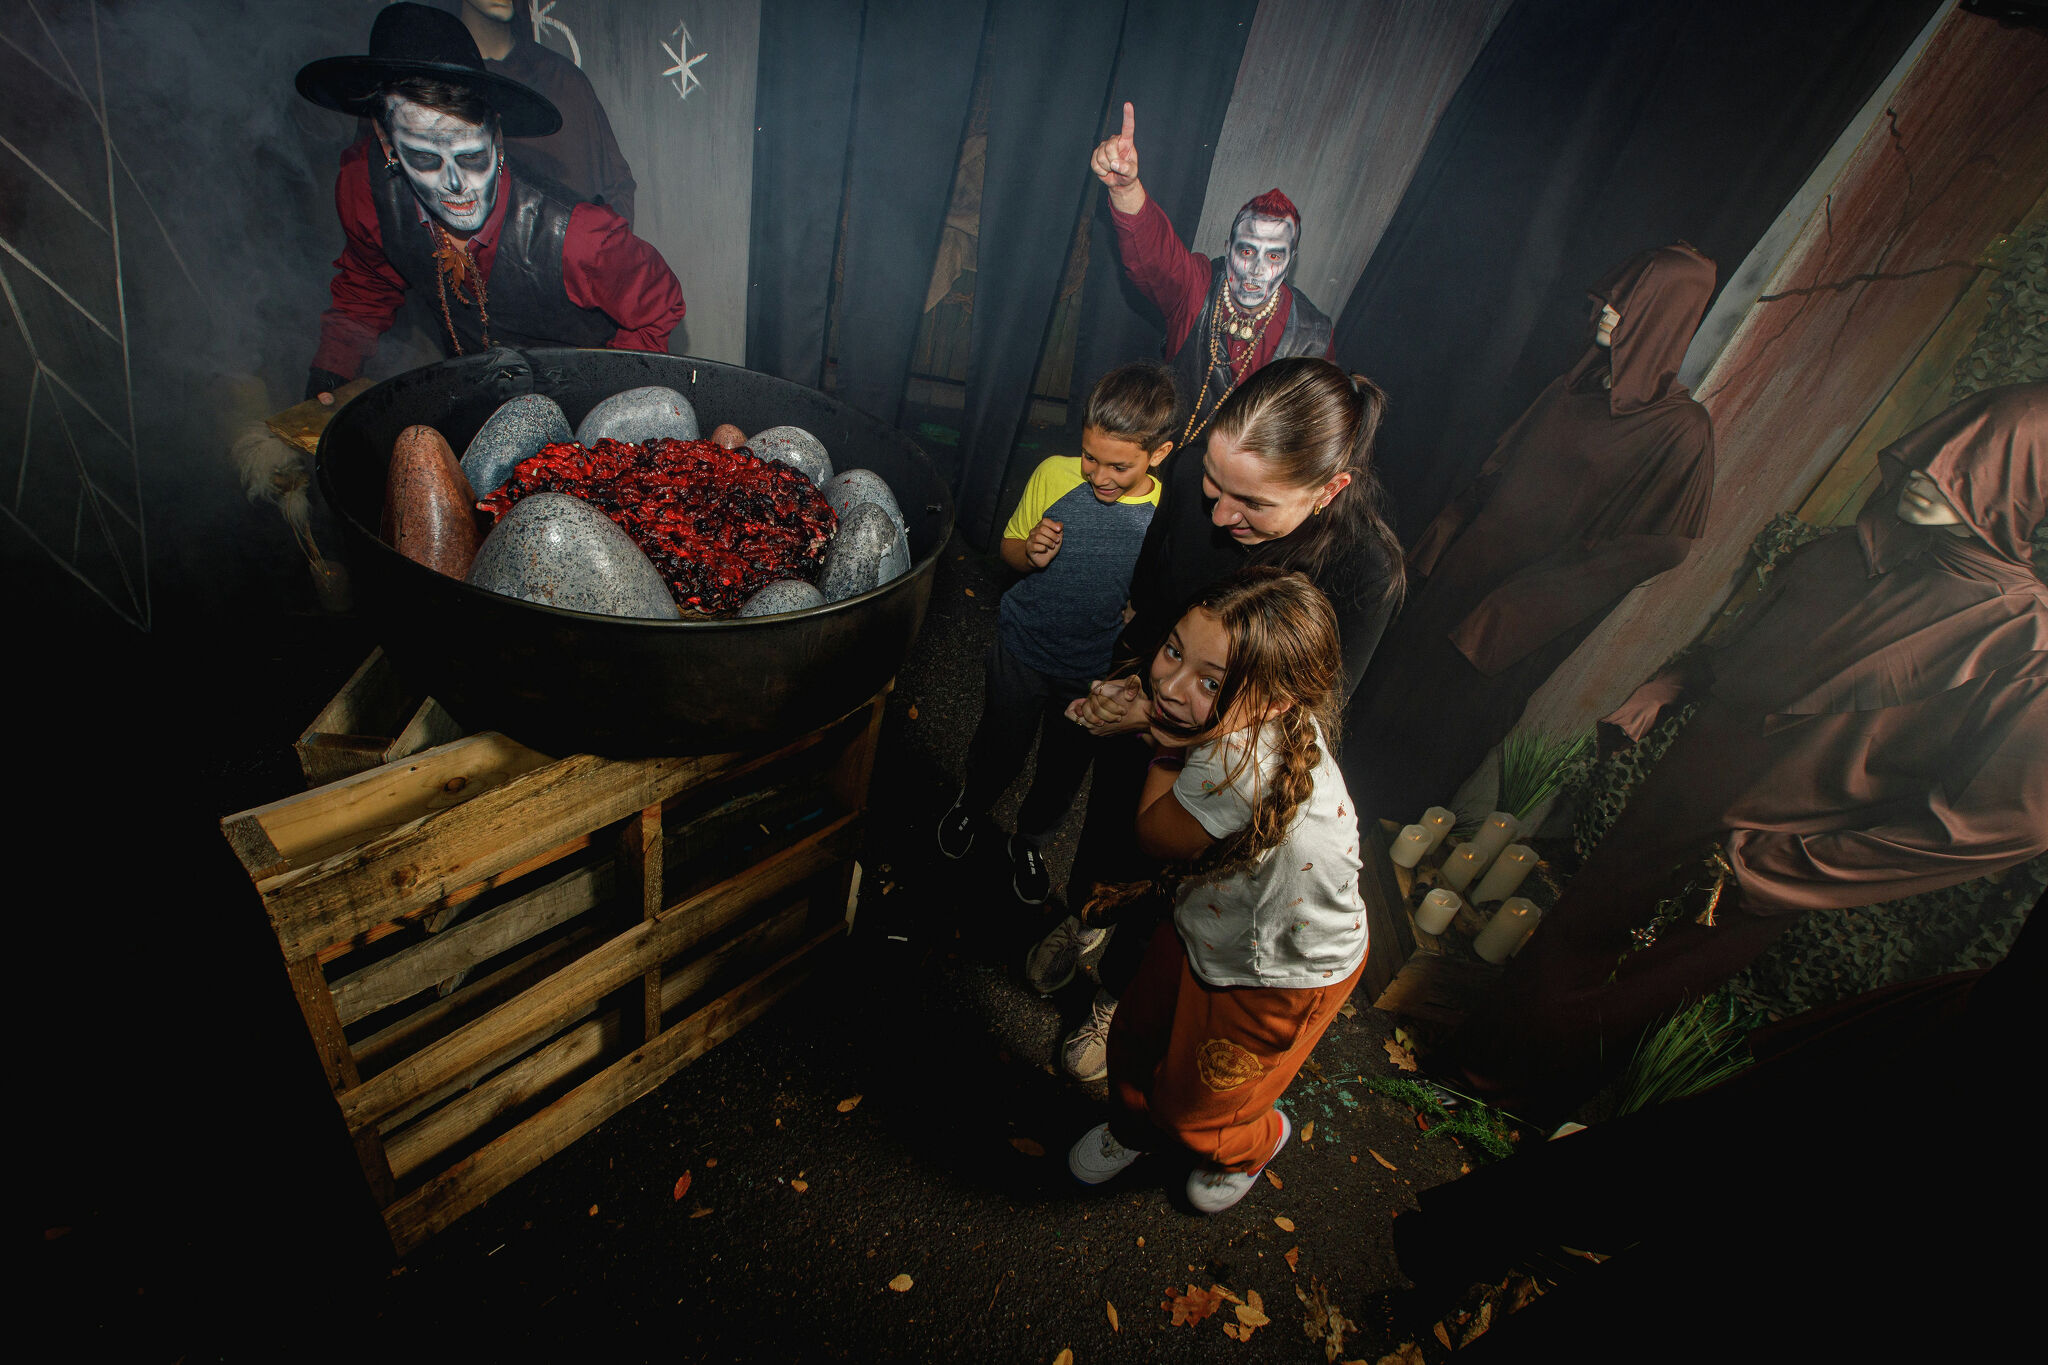 Haunted Hayride And Trail Of Terror This Month In Shelton